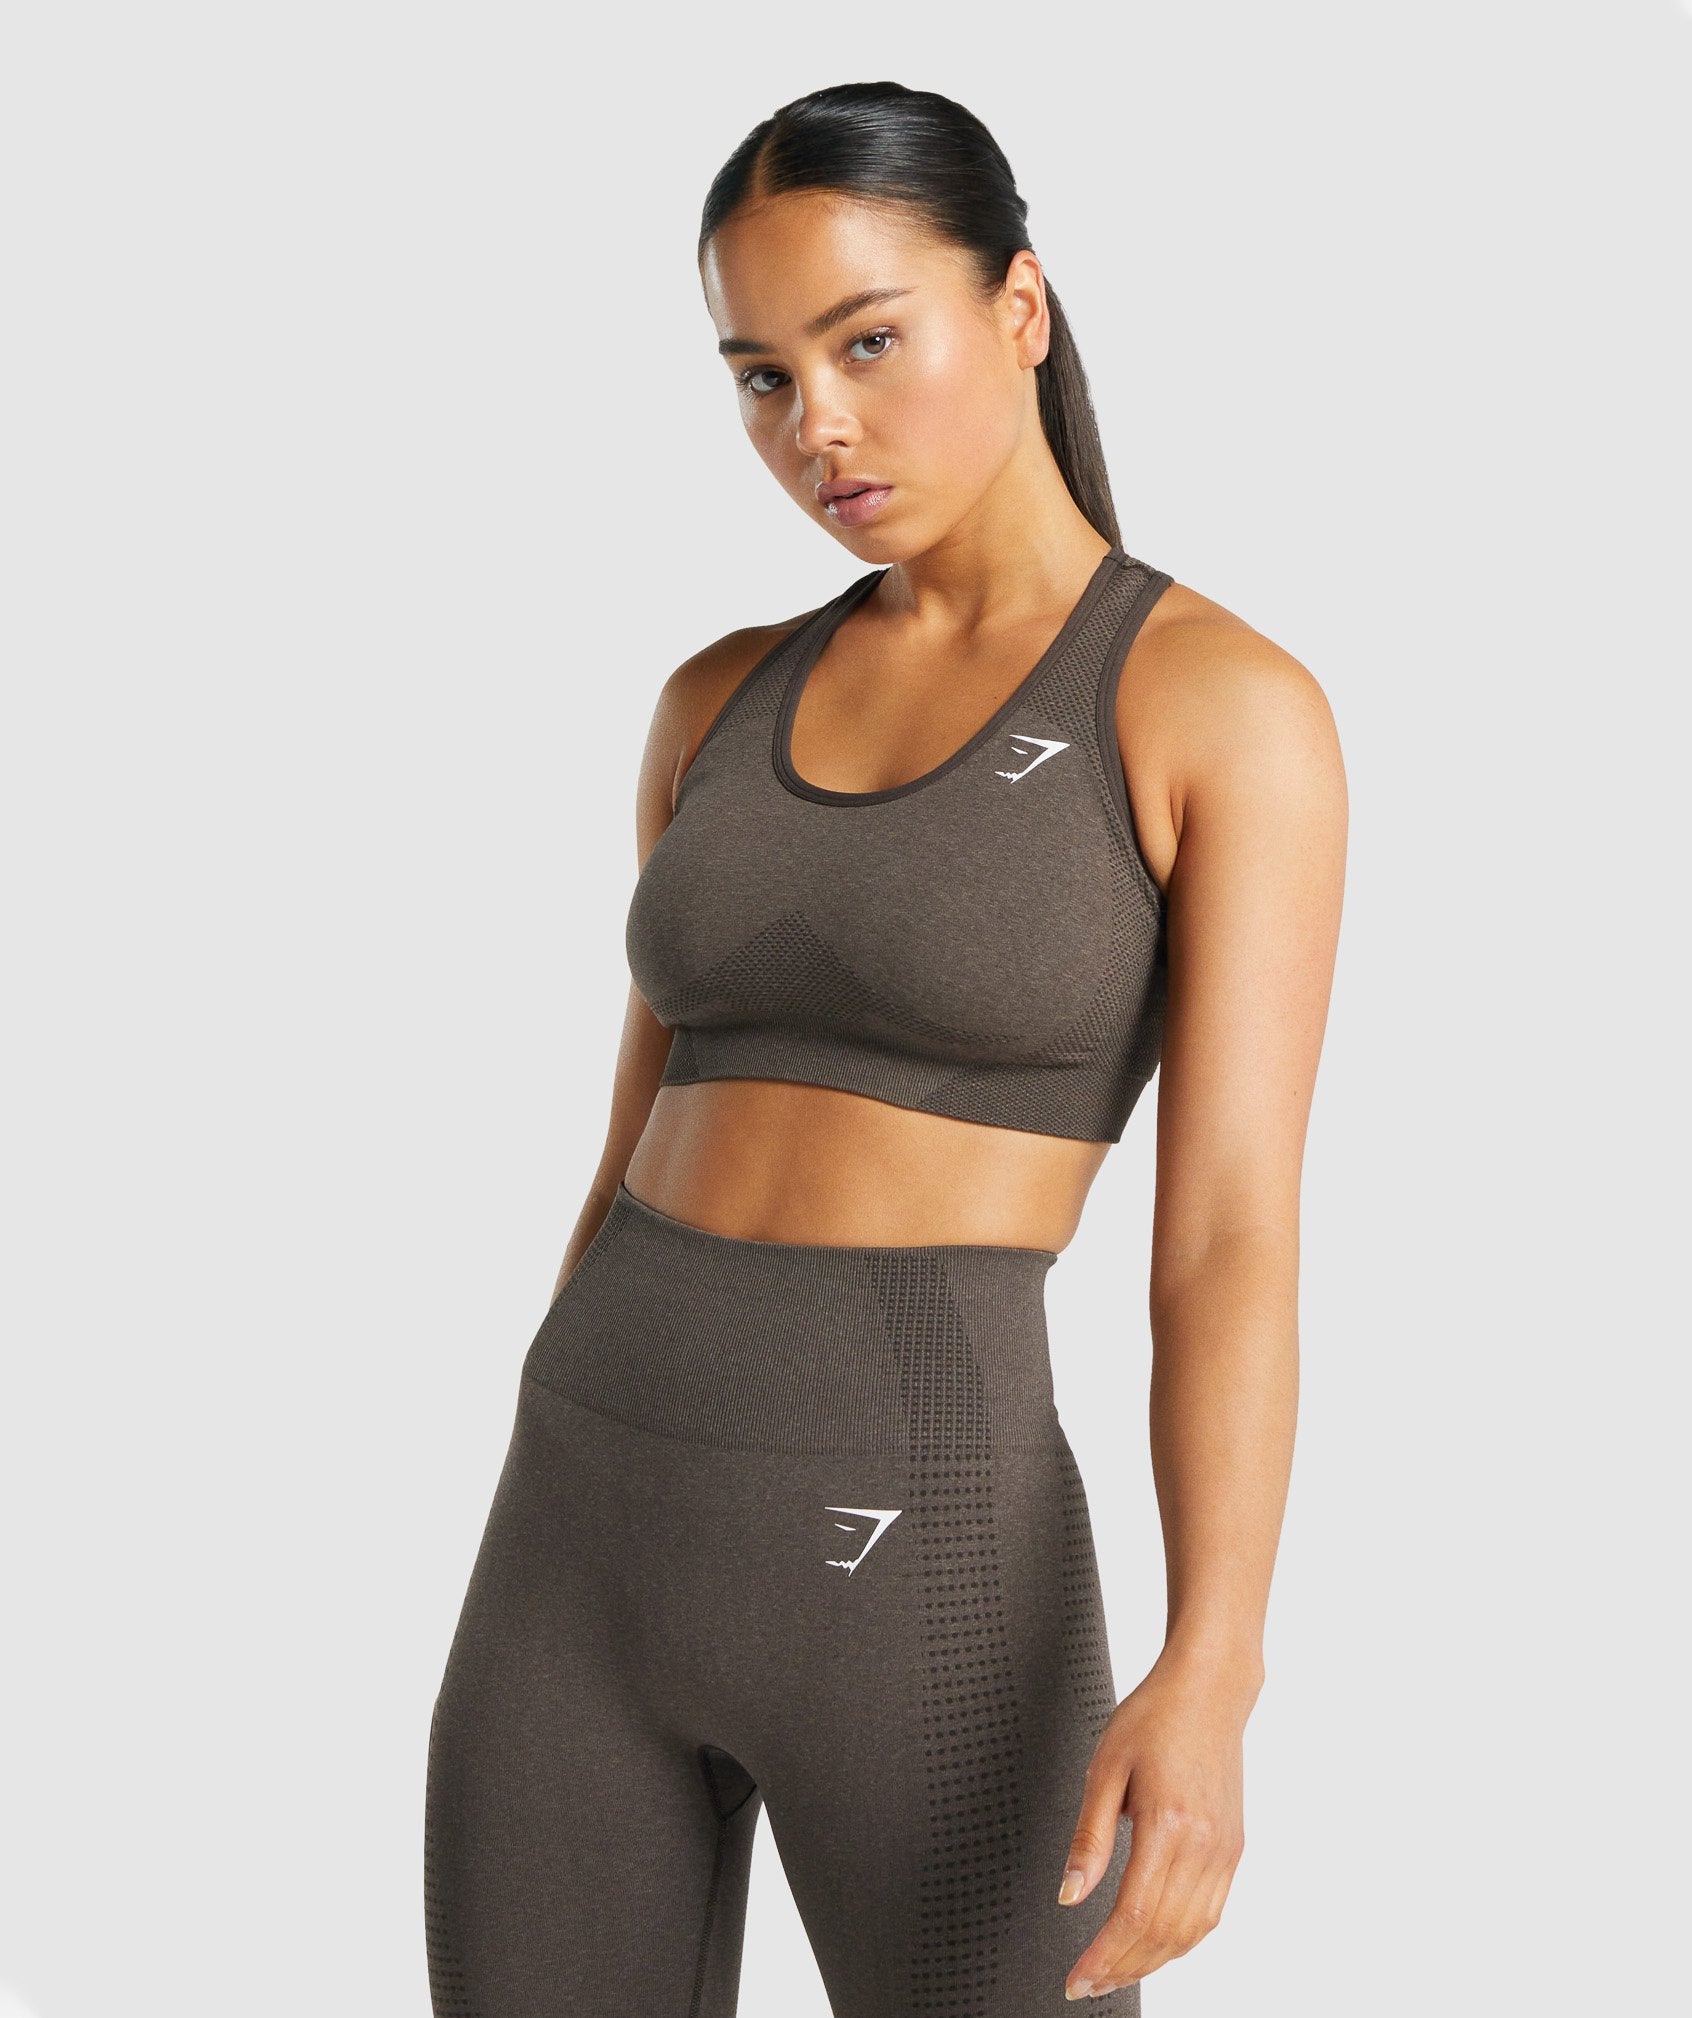 Seamless Clothing  Seamless Gym Wear From Gymshark